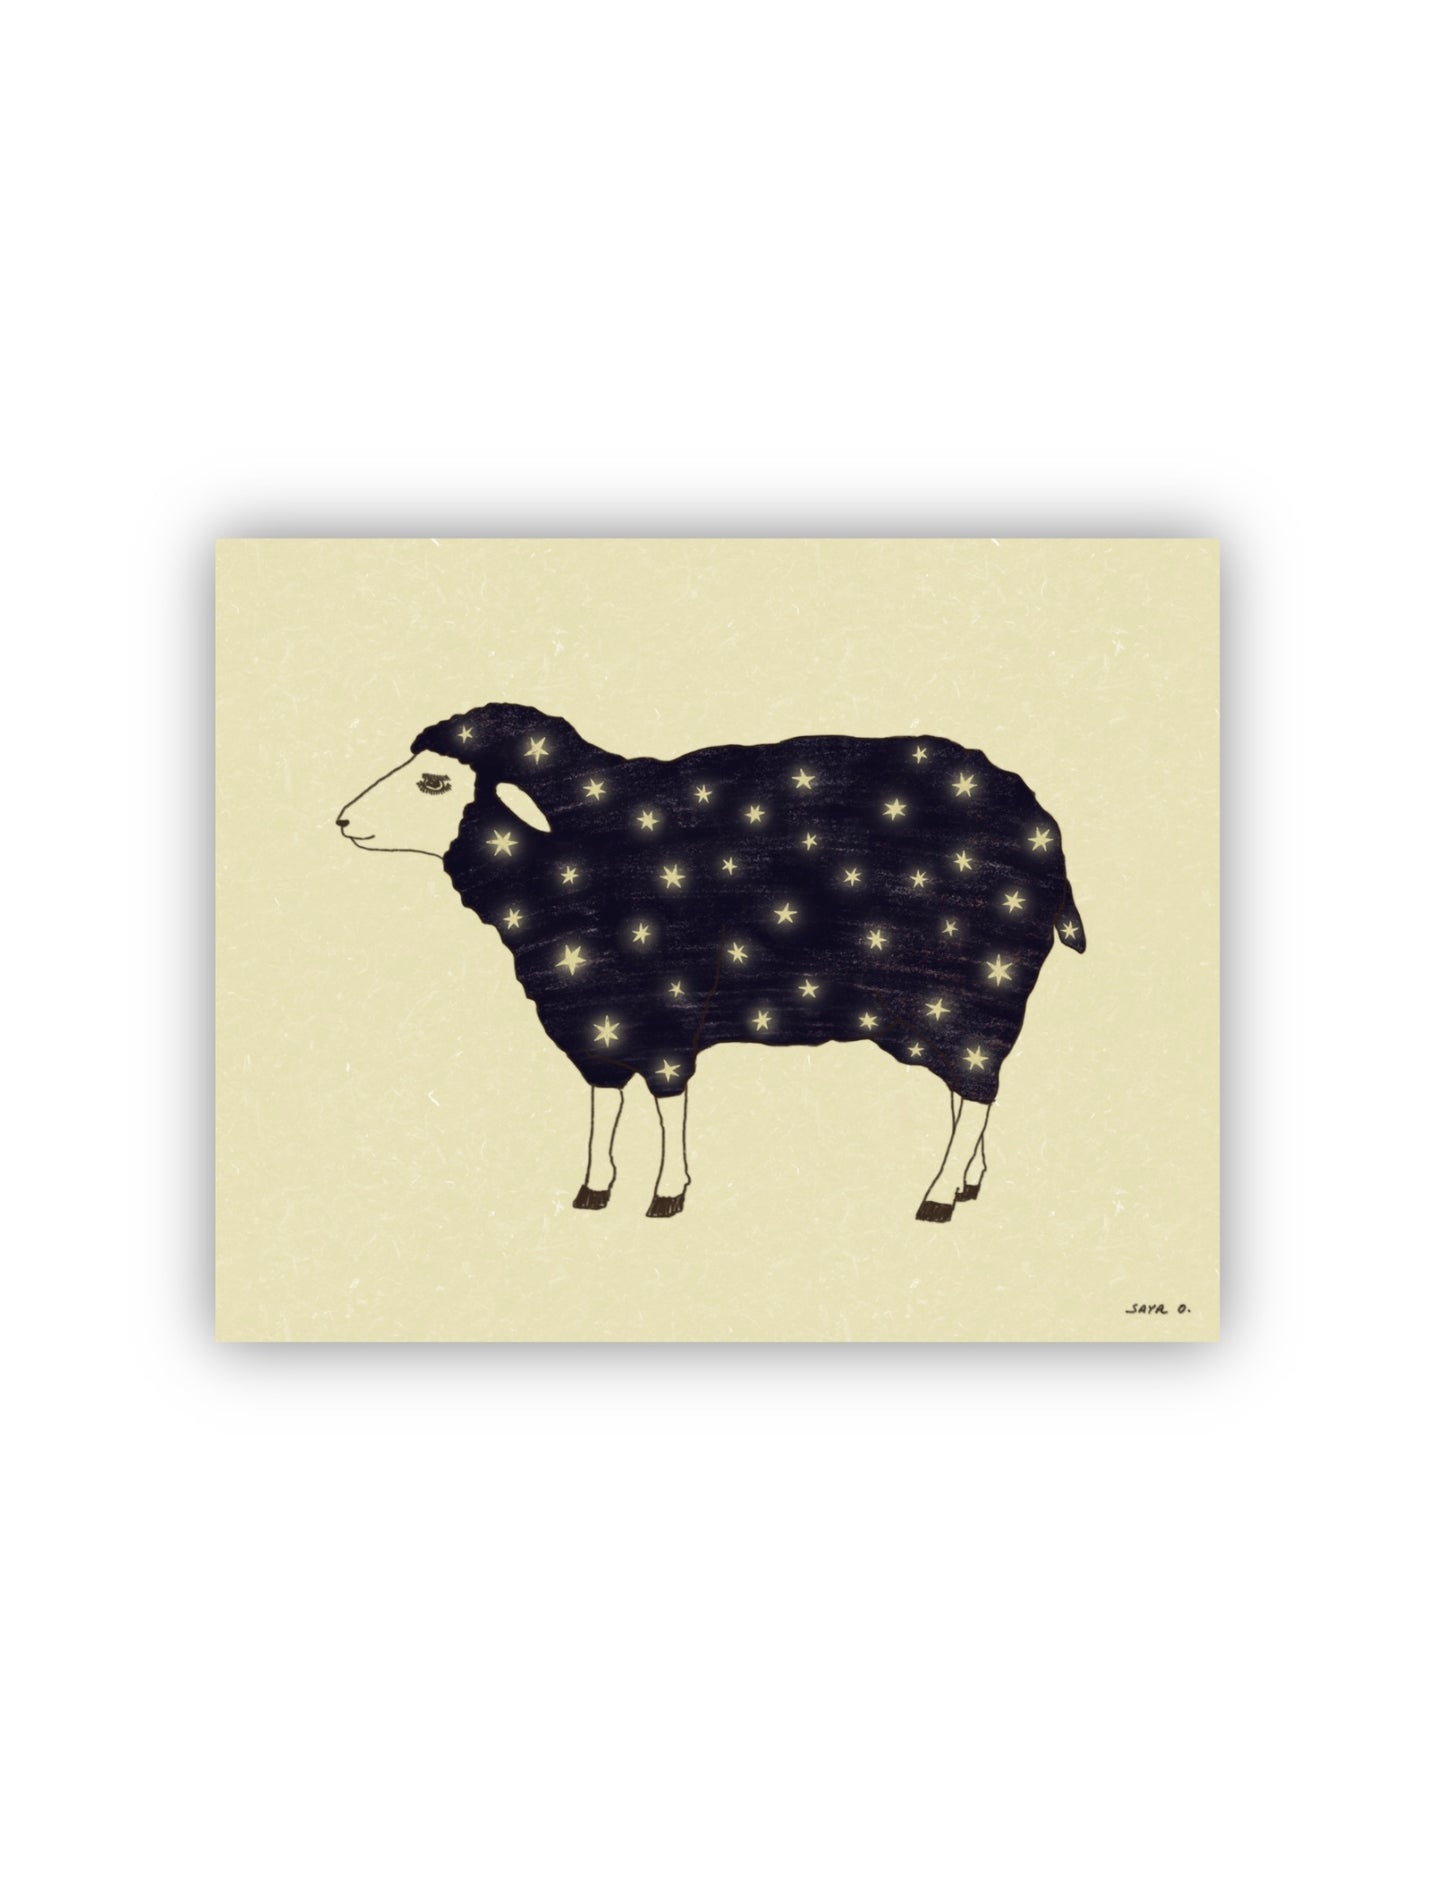 Dreamy 8x10 art print with a sheep with a starry sky on its body on a beige background